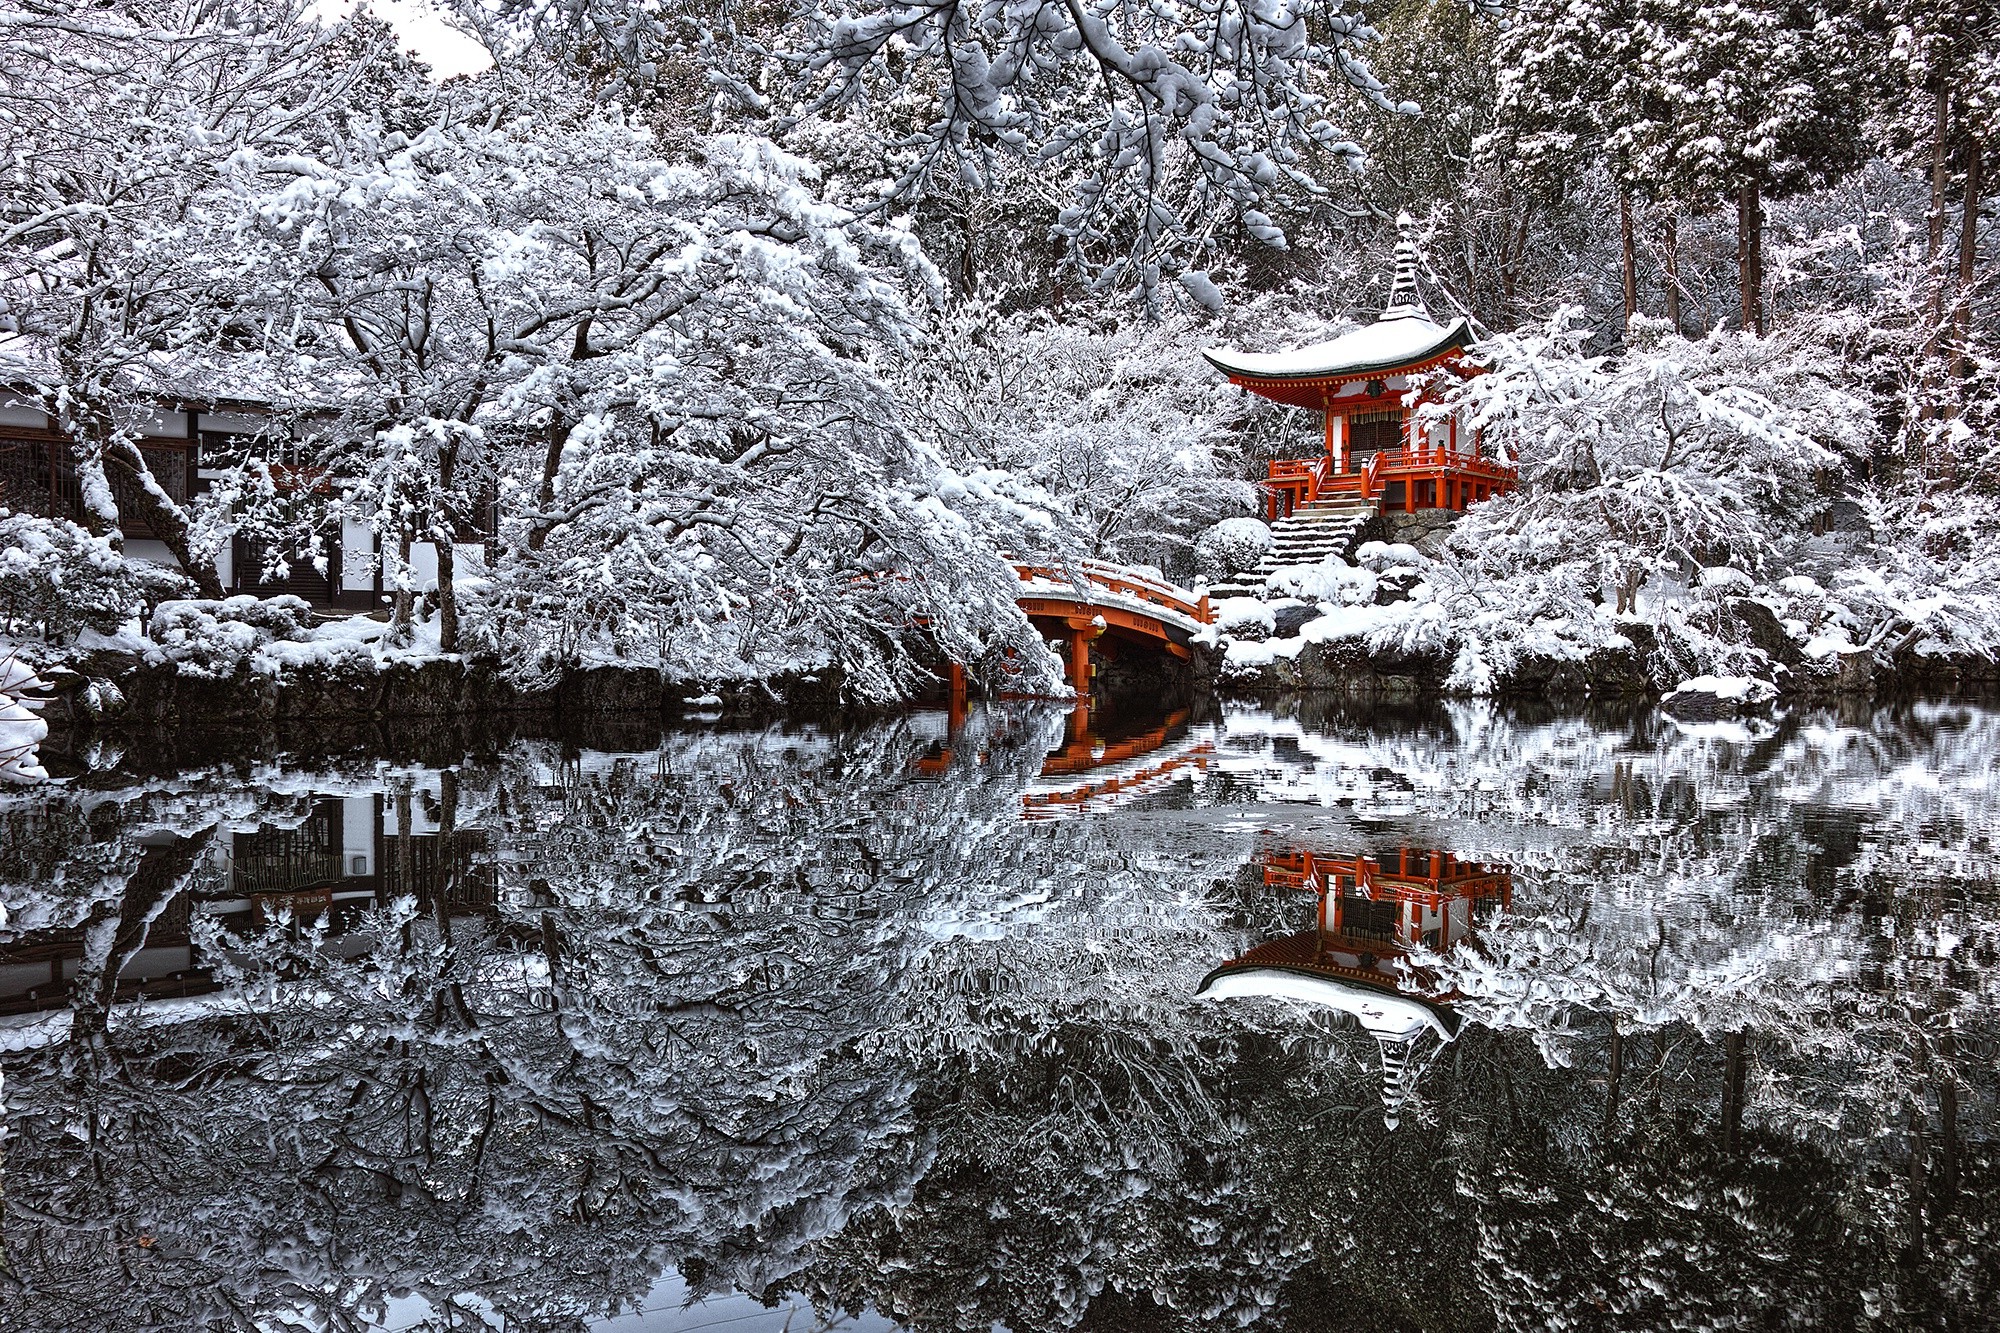 Japan, Winter, Pagoda, Snow, Water, Pond, Reflection, Trees, Asian Architecture, Architecture, Nature, Landscape, Bridge Wallpaper HD / Desktop and Mobile Background